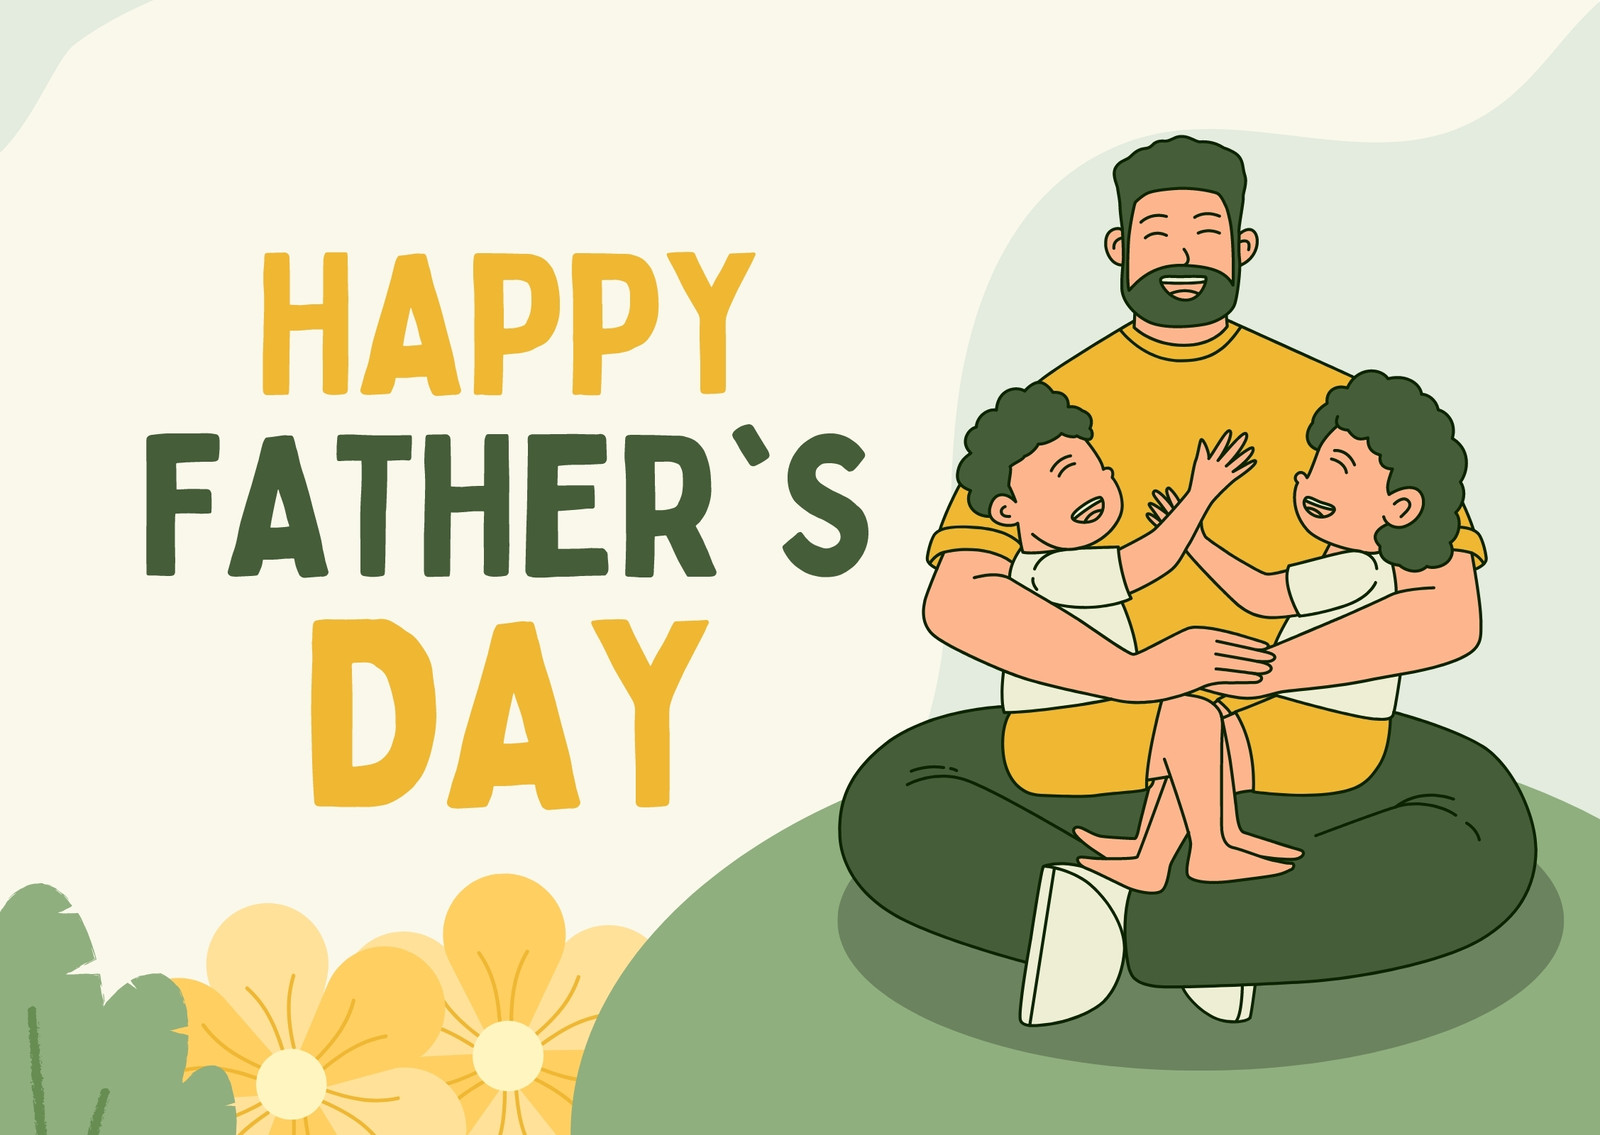 Page 6 - Free, printable Father's Day card templates to personalize | Canva